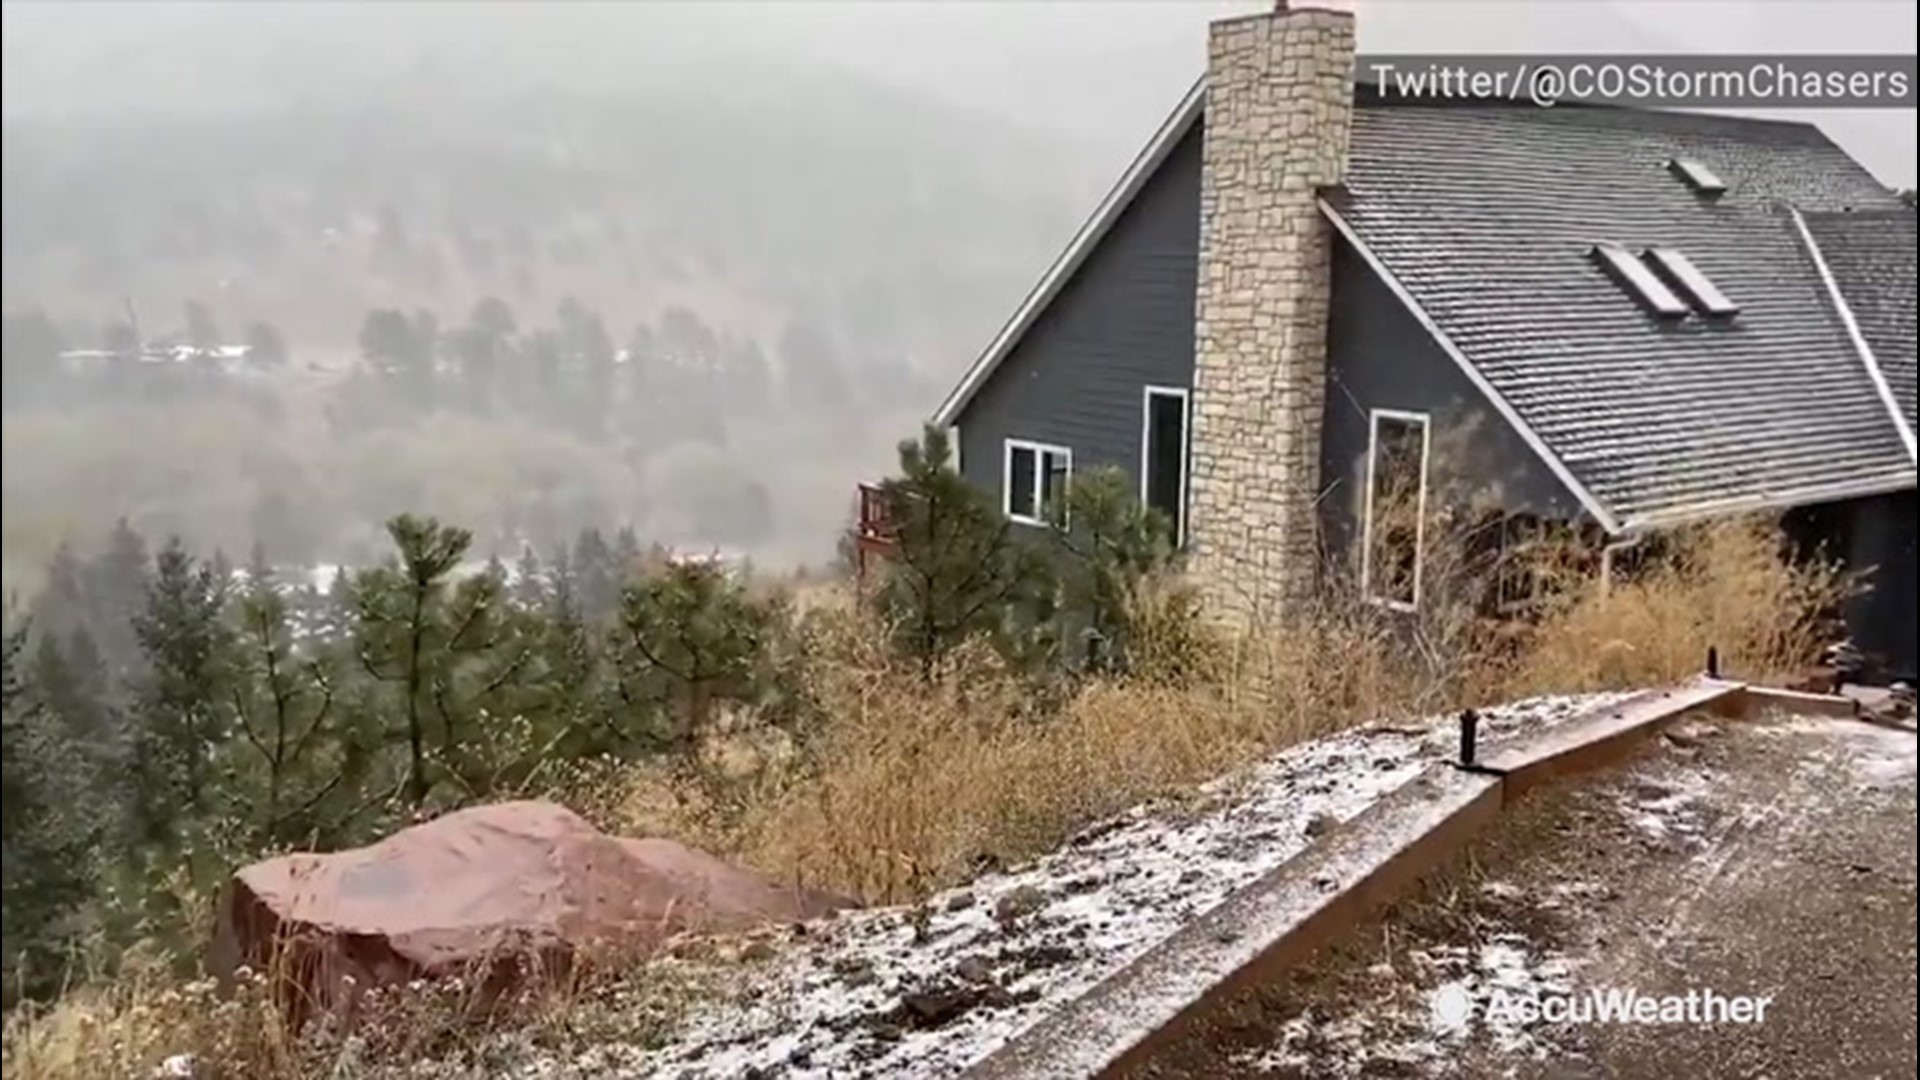 Though the amount of snow that fell on Cascade, Colorado, on Oct. 23, wasn't very large, some of it still stuck to the ground. More was expected to fall into the night.